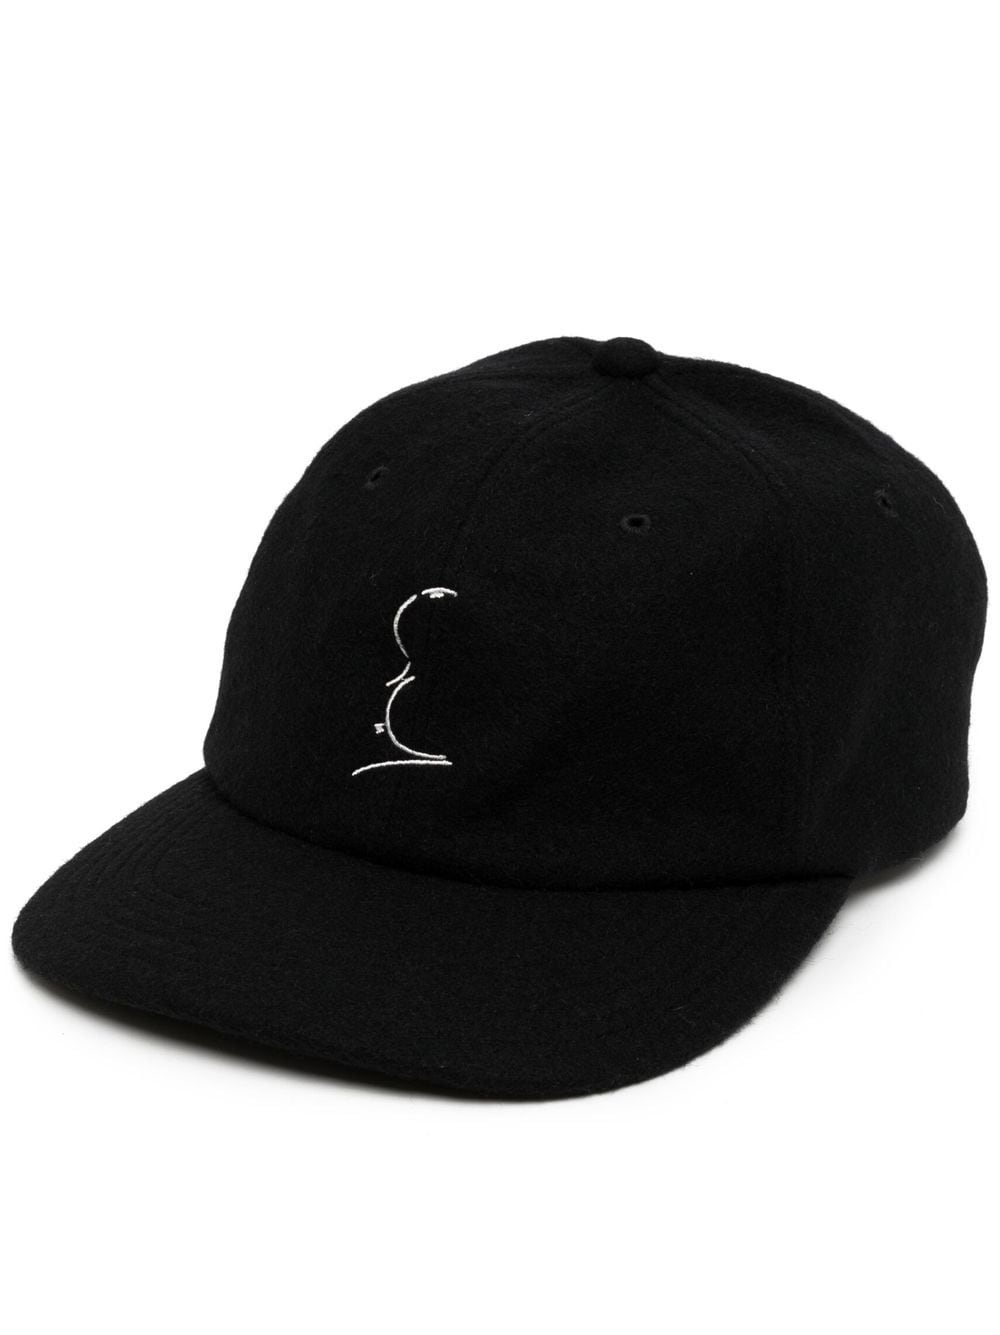 undercover-alfred-hitchcock-embroidery-cap-farfetch